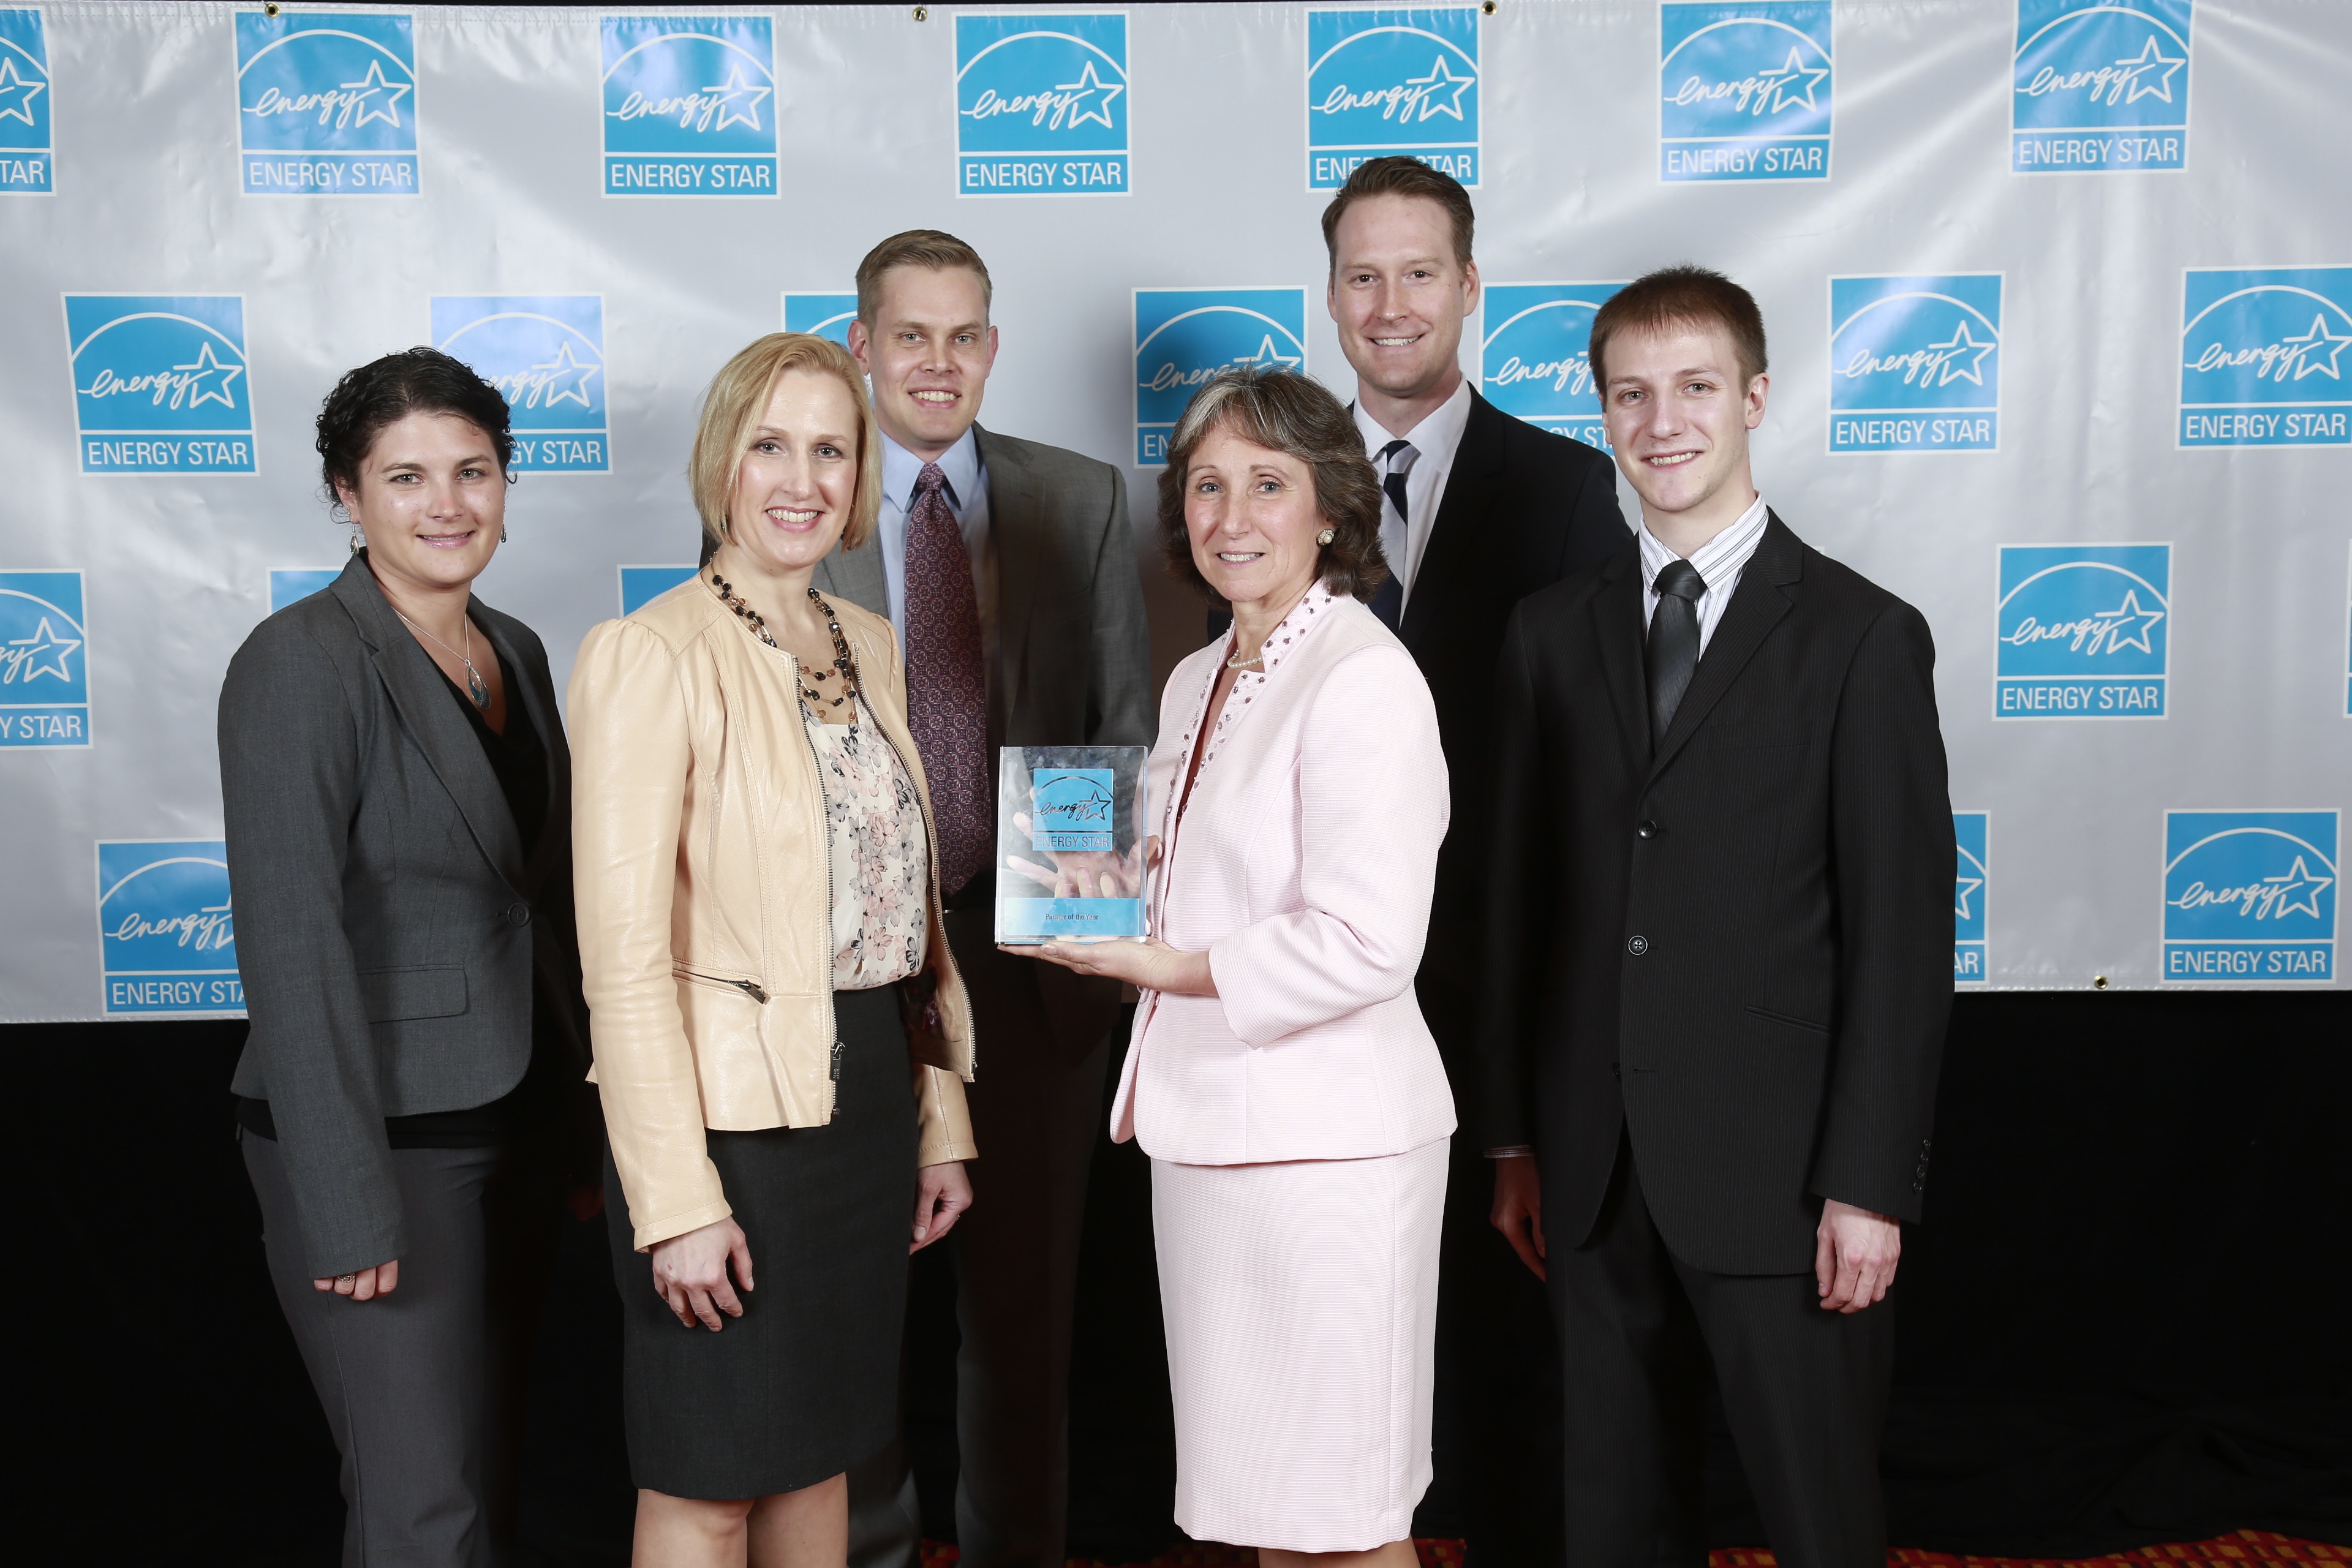 EnergyPrint team members in Washington, D.C. to receive 2015 ENERGY STAR Partner of the Year Award.